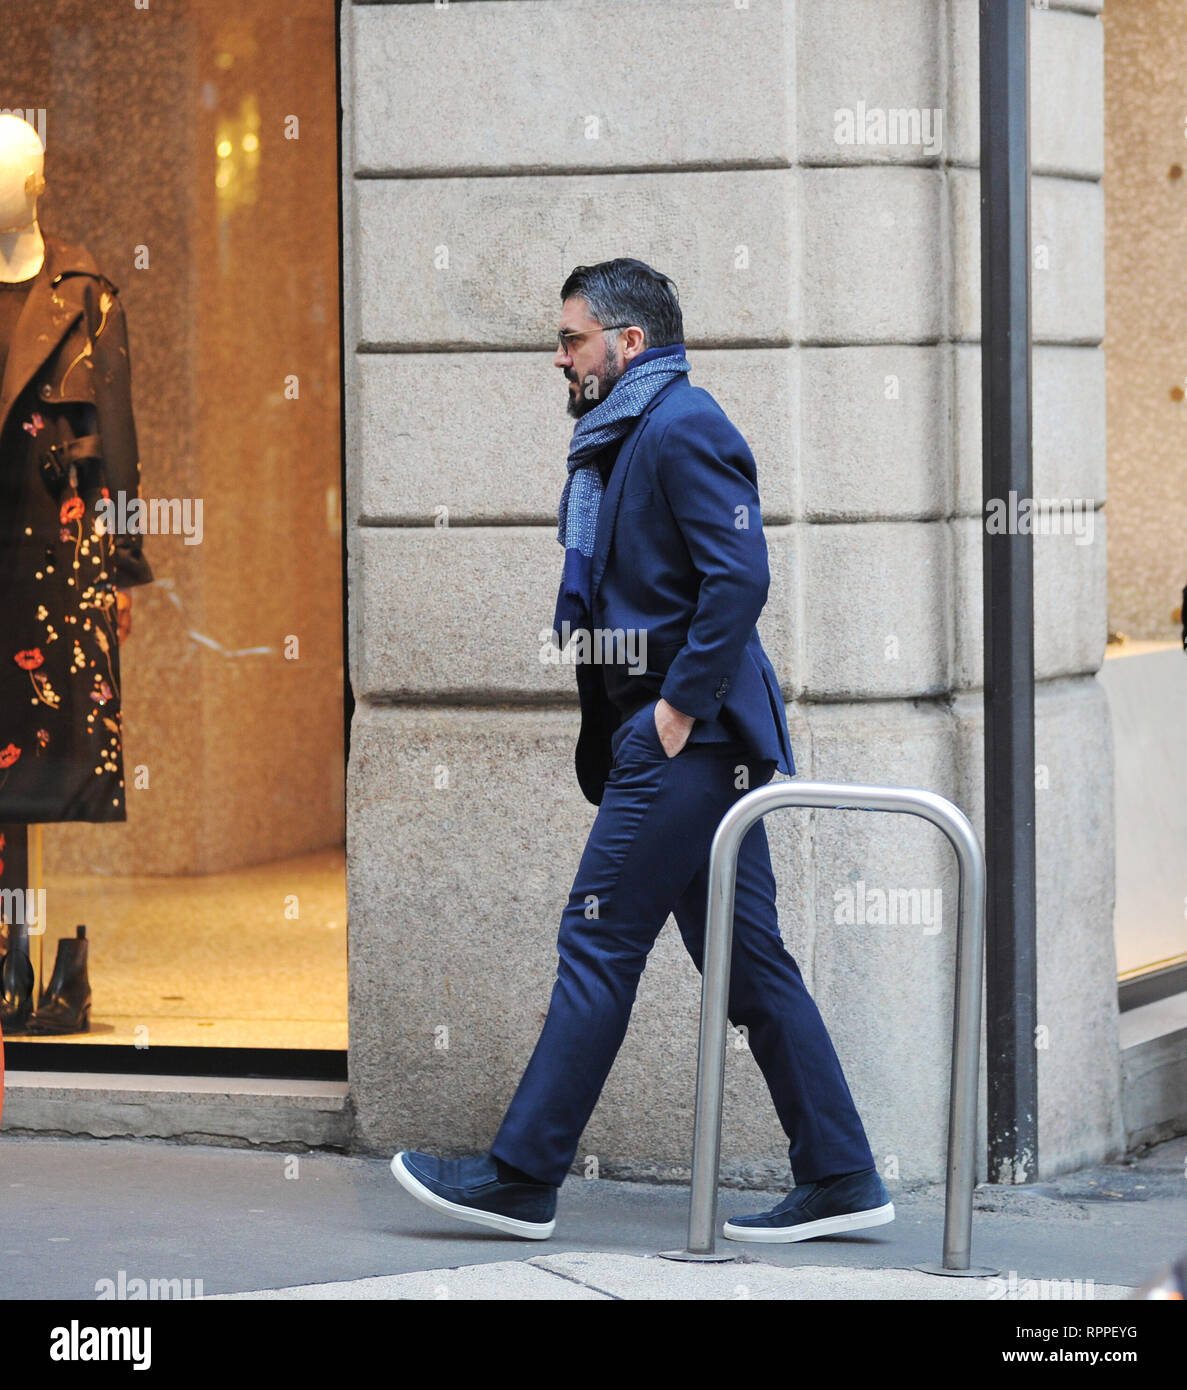 Rino Gattuso out and about with his family after having a meal at the Salumaio di Montenapoleone in Milan  Featuring: Rino Gattuso Where: Milan, Italy When: 22 Jan 2019 Credit: IPA/WENN.com  **Only available for publication in UK, USA, Germany, Austria, Switzerland** Stock Photo